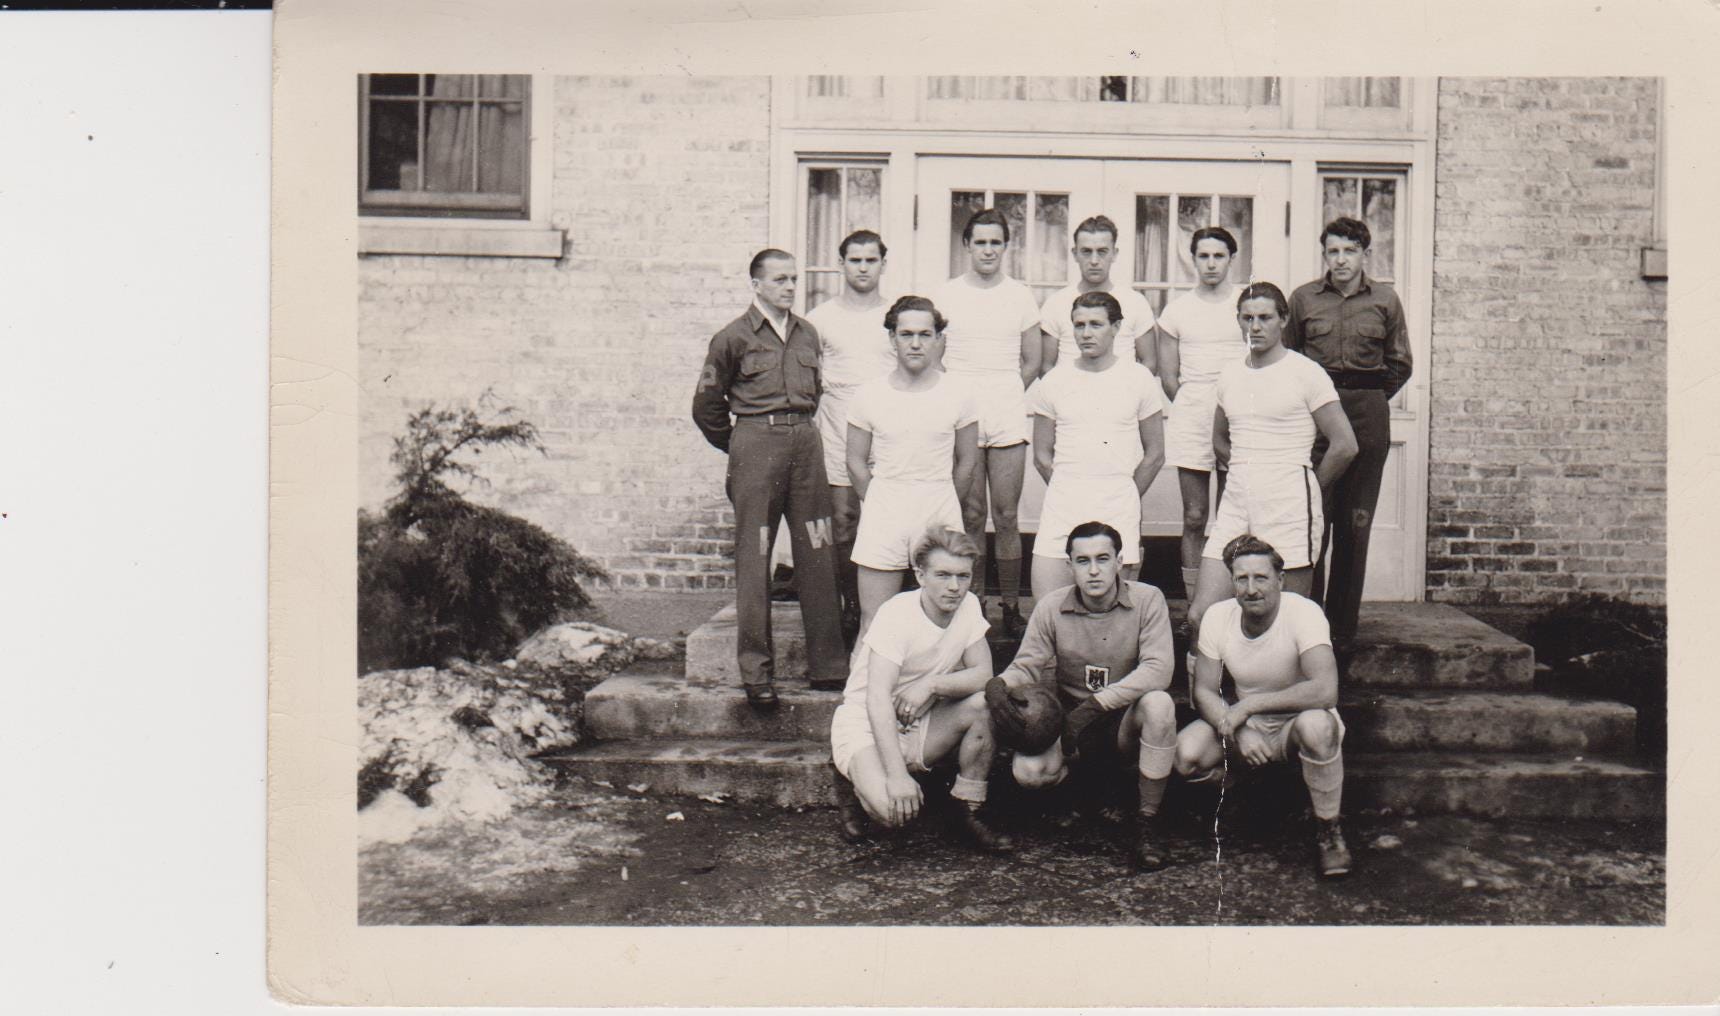 During his time at Camp Hartford, Kurt Pechmann was part of a soccer team. In this photo from January 1945, the soccer team is pictured, with Pechmann seen on the left side of the middle row.